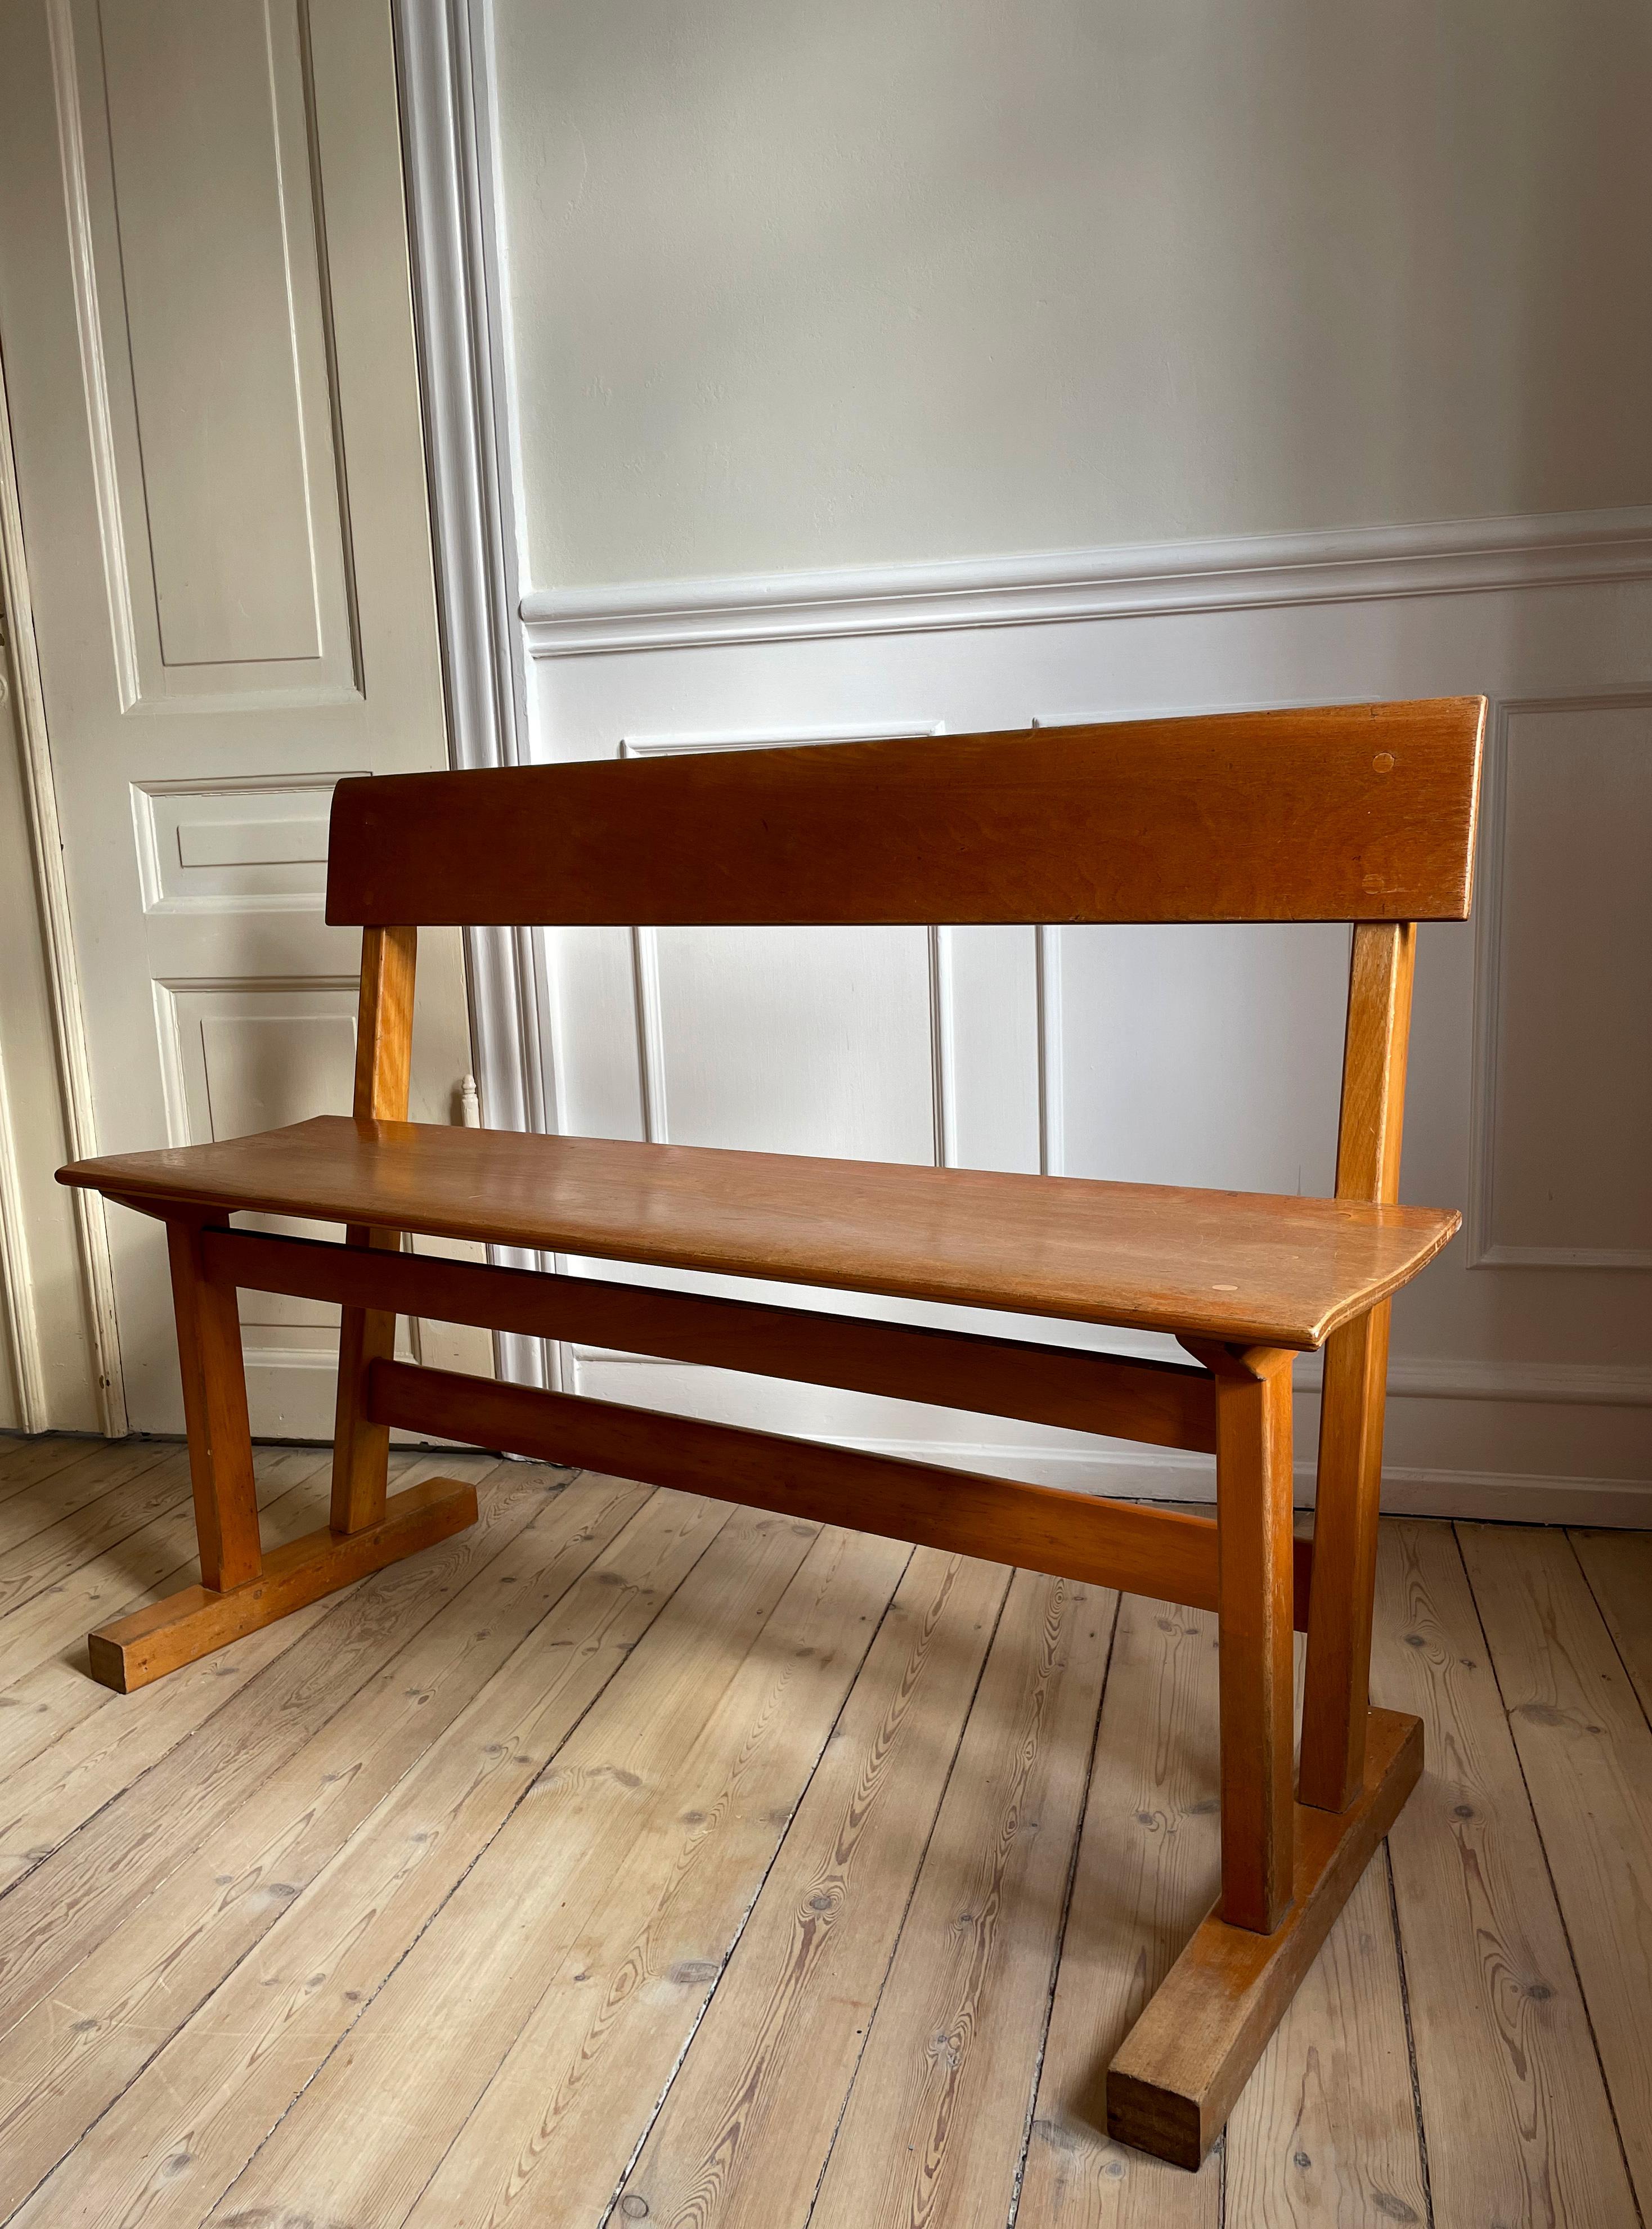 Handmade midcentury Danish modern wooden bench with a slightly higher seat than the average dining chair. Solid, stable designed construction with slight curved slant in seat and back rest, beautiful joints and a classic minimalist aesthetic. A